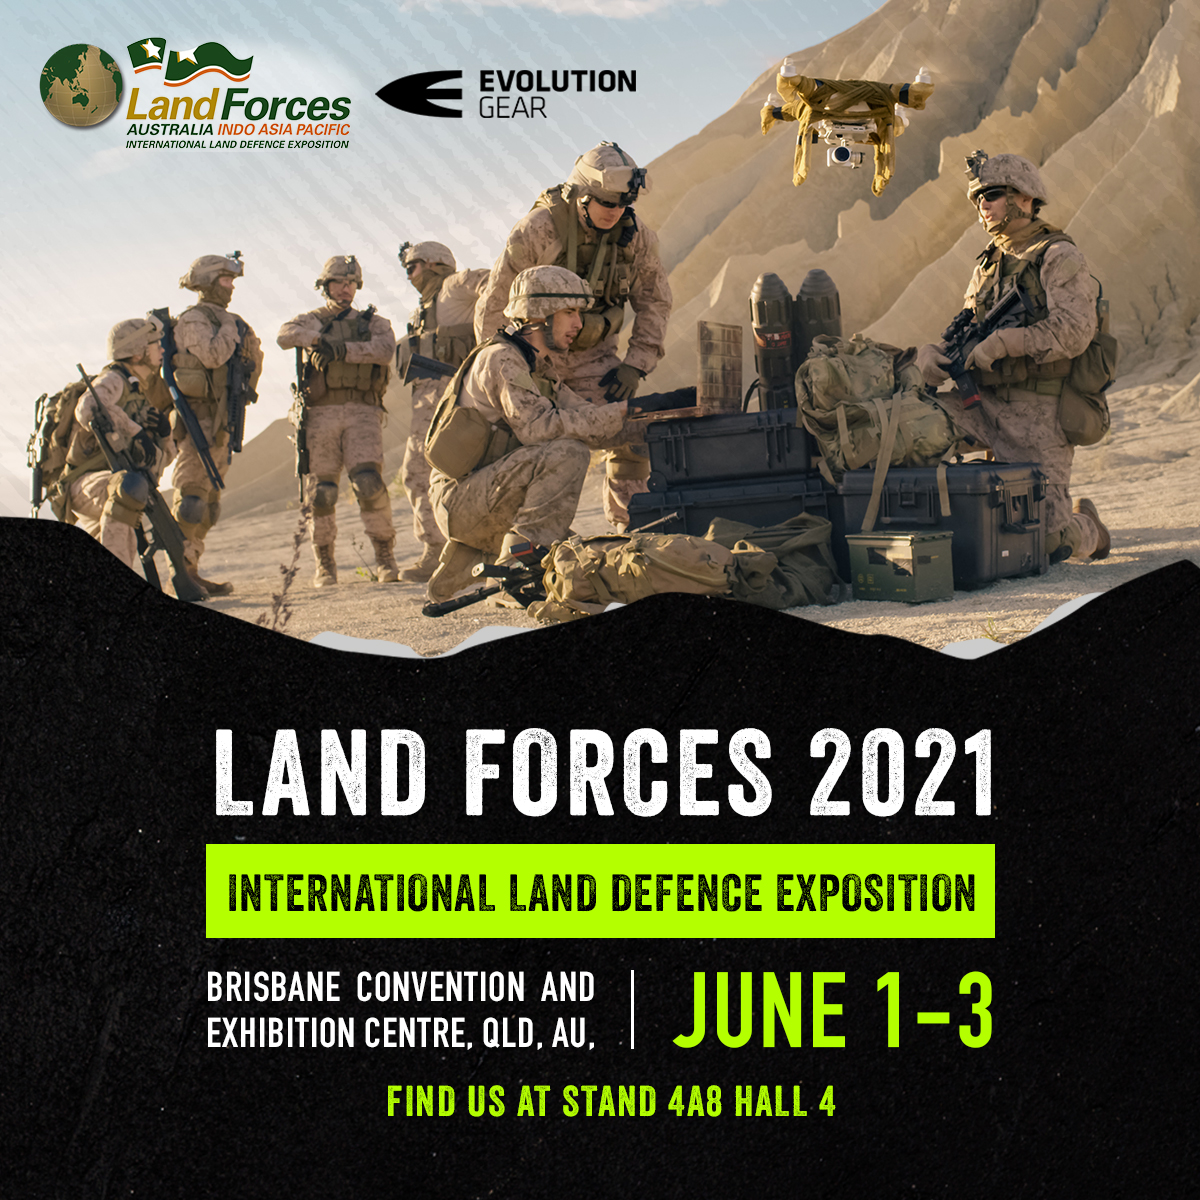 We’re exhibiting at LAND FORCES International Land Defence Exposition 2021